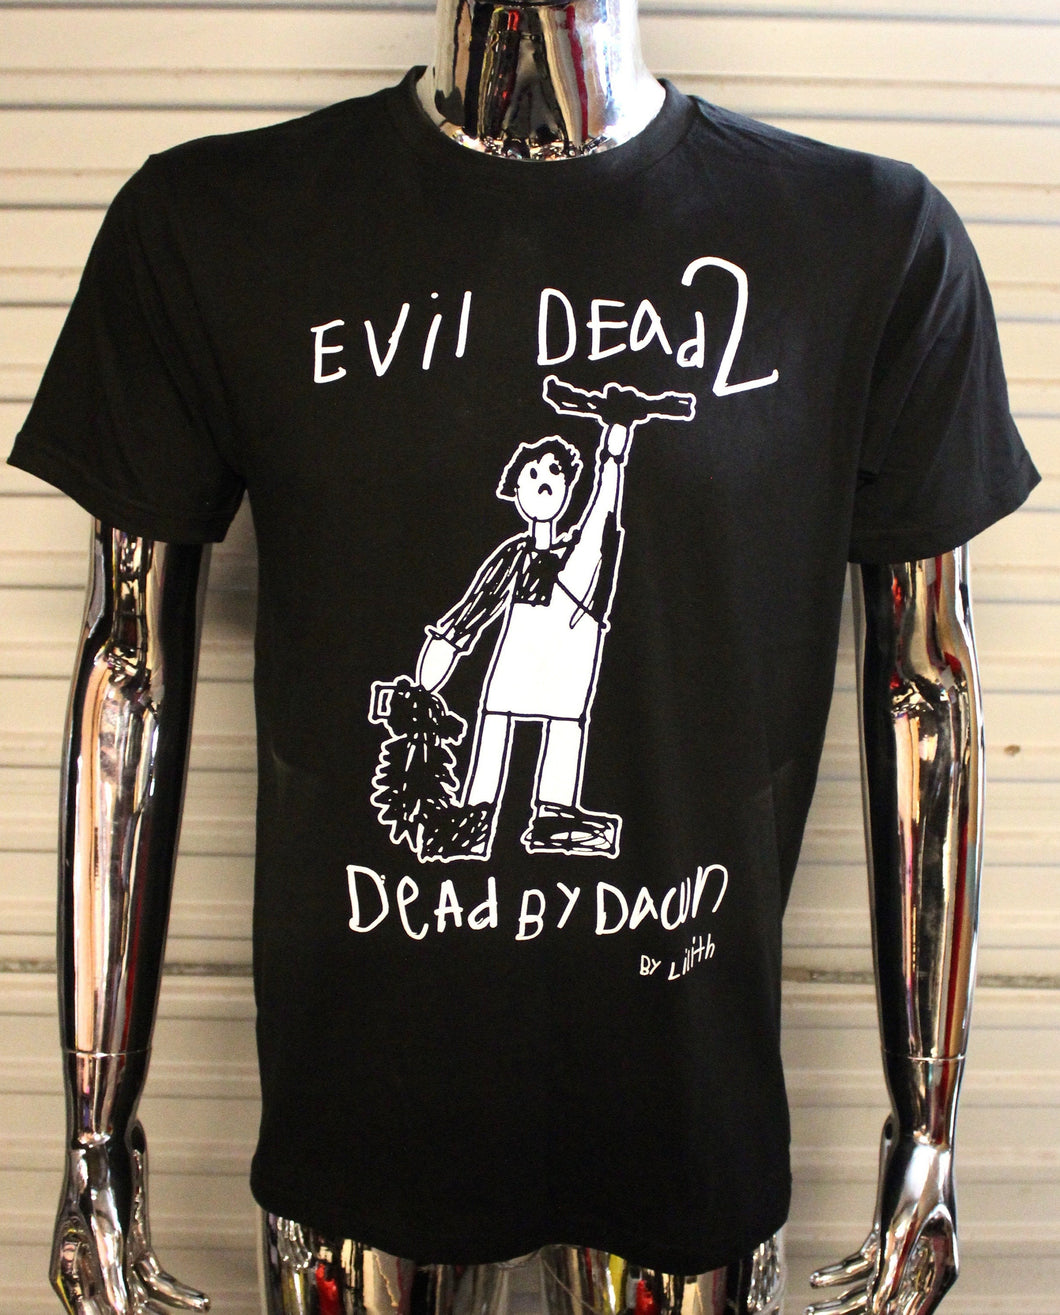 Evil Dead 2 by Lilith T-shirt